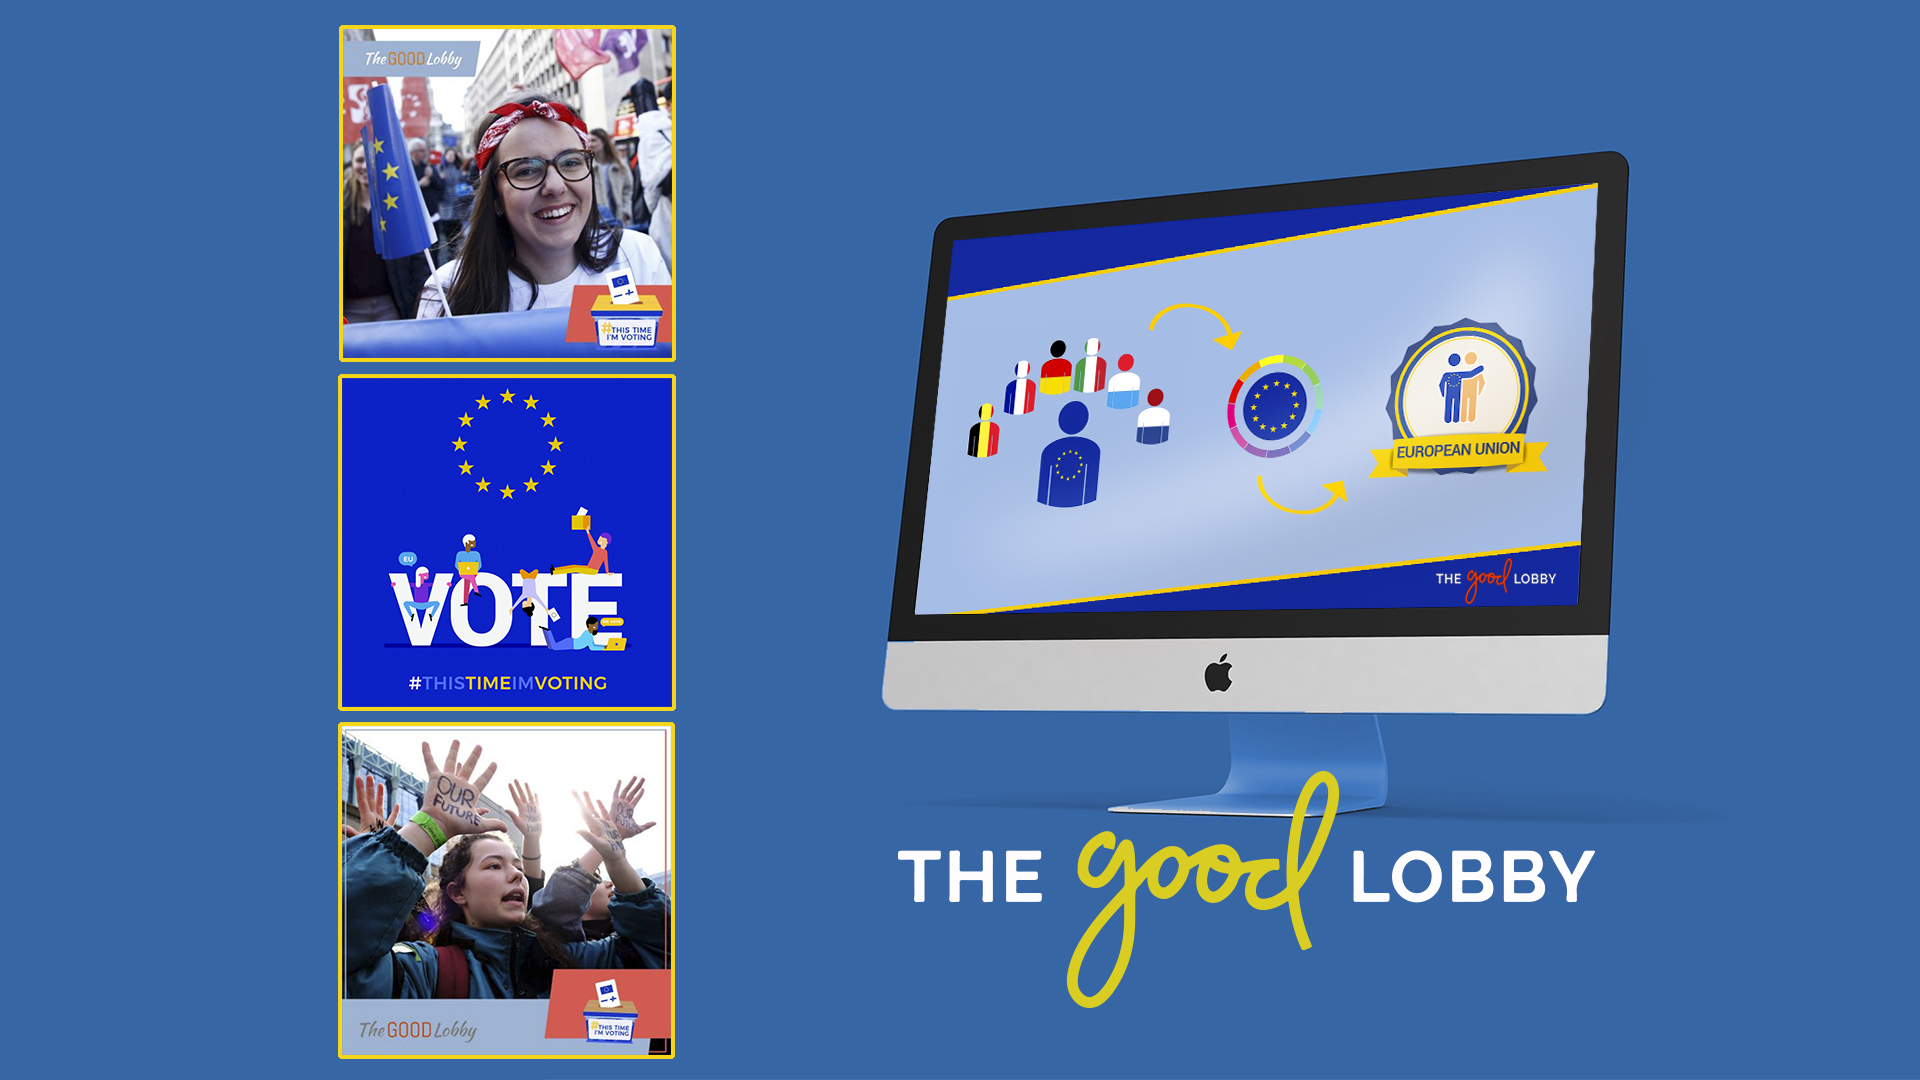 The Good Lobby EP elections